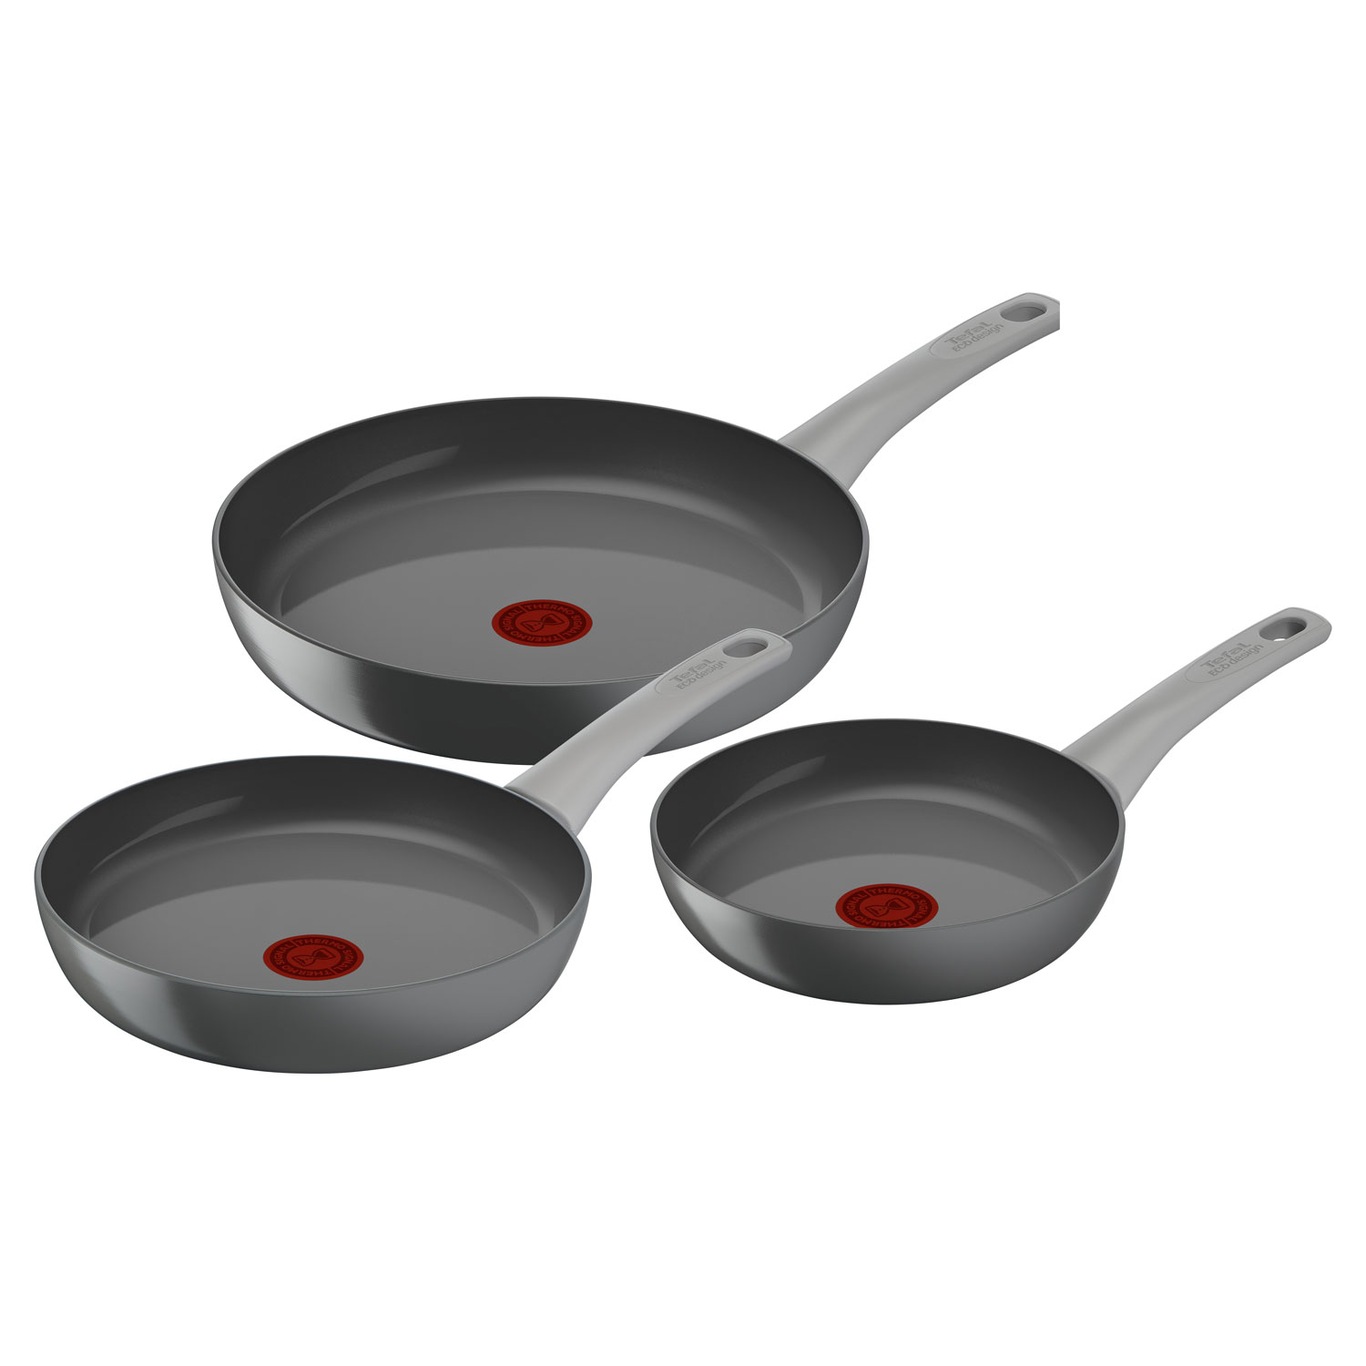 Renew ON Frying Pan, 3 Pieces